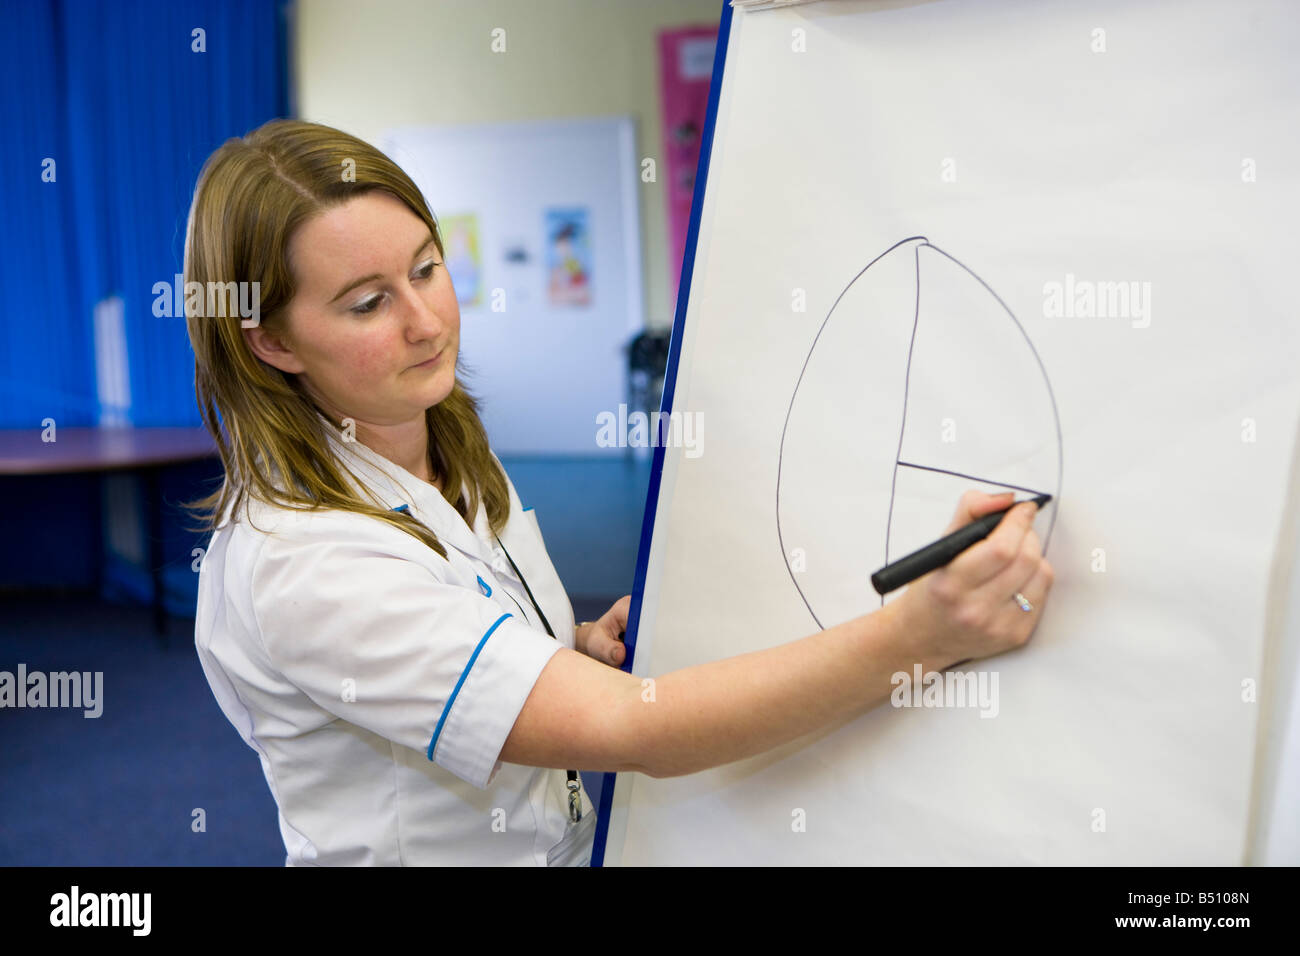 nurse using a pie chart to teach food groups in a healthy eating class Stock Photo